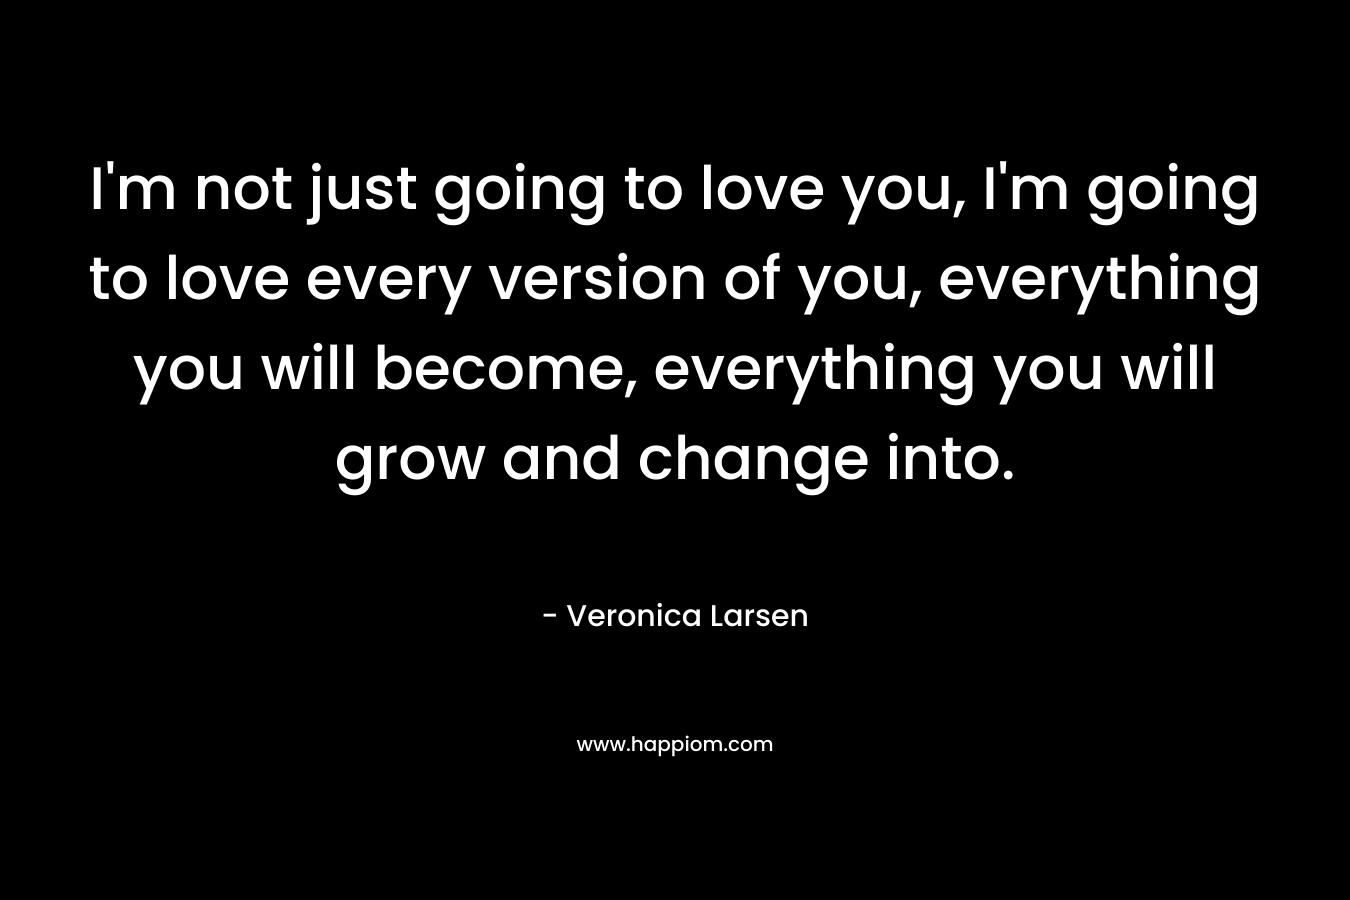 I'm not just going to love you, I'm going to love every version of you, everything you will become, everything you will grow and change into.